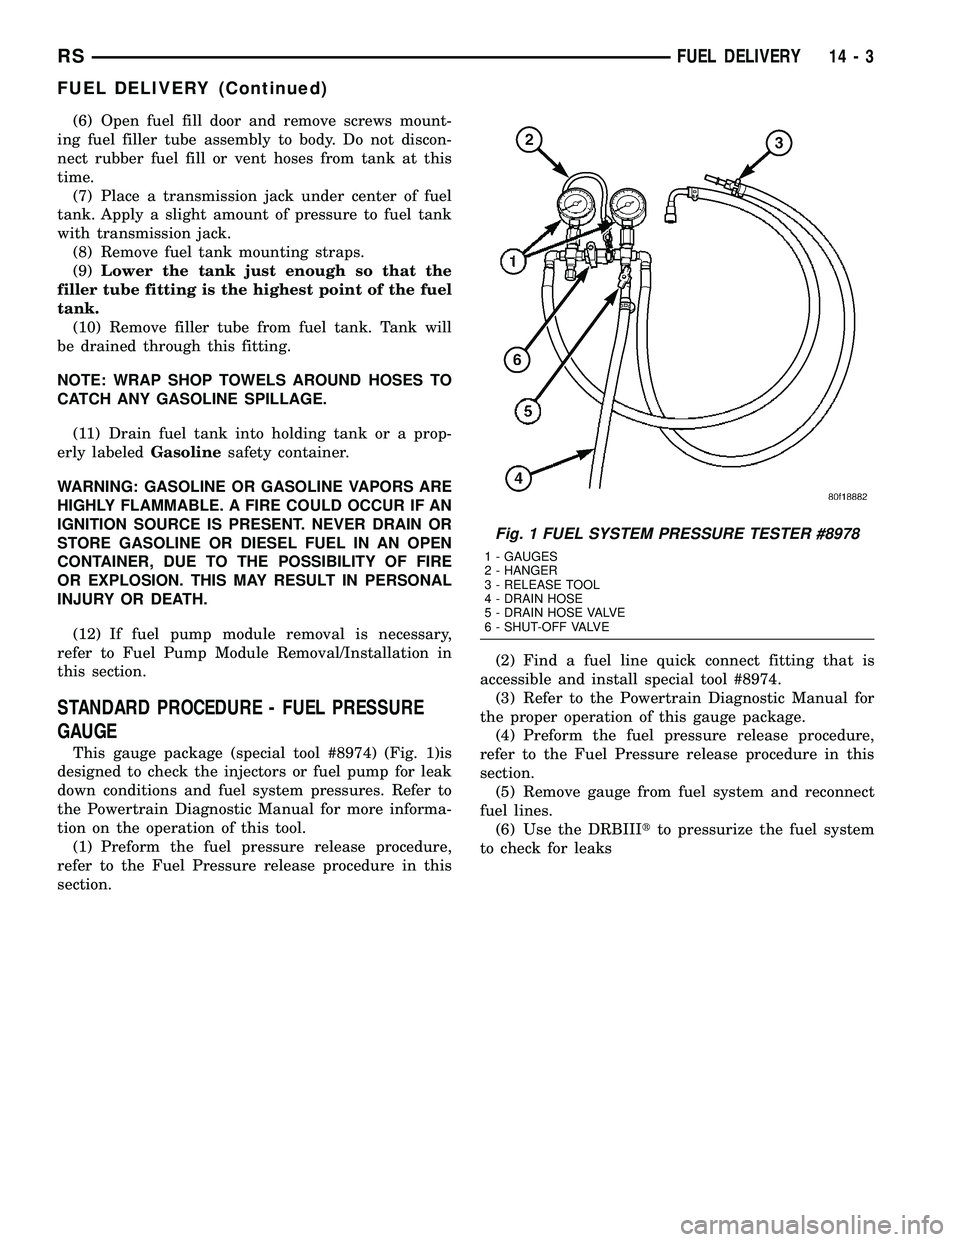 CHRYSLER CARAVAN 2005  Service Manual (6) Open fuel fill door and remove screws mount-
ing fuel filler tube assembly to body. Do not discon-
nect rubber fuel fill or vent hoses from tank at this
time.
(7) Place a transmission jack under c